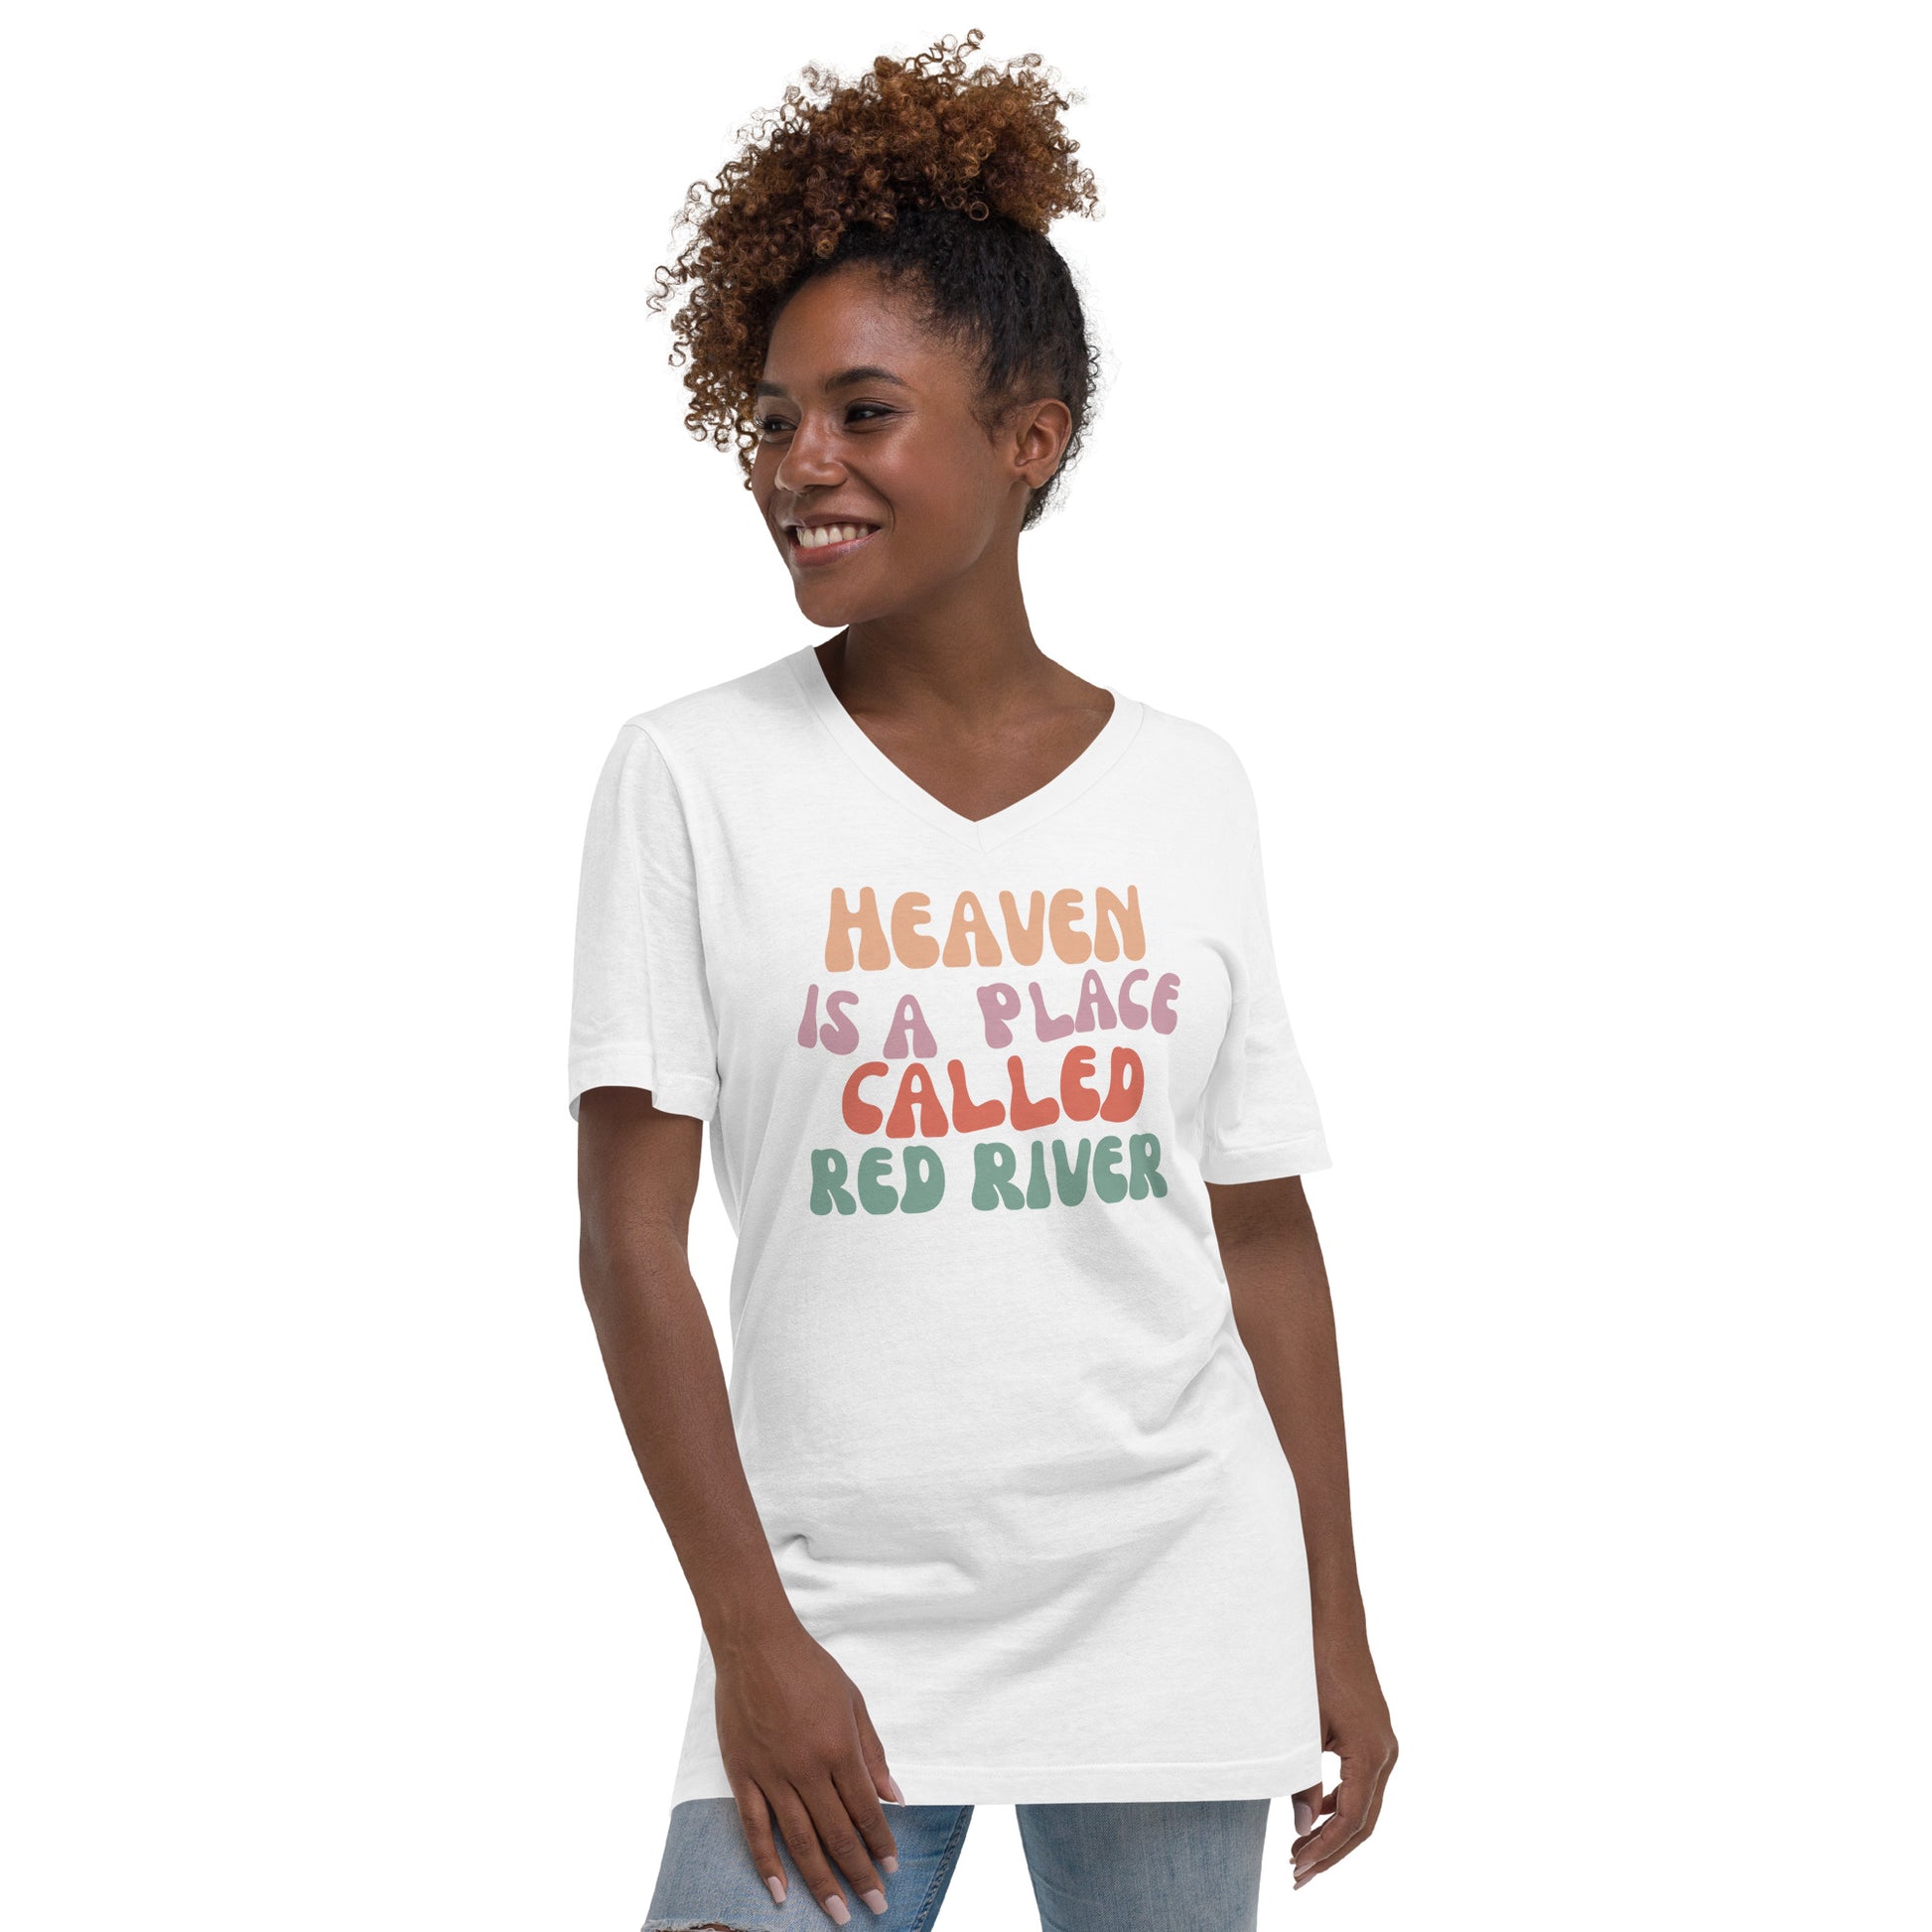 red river, new mexico, heaven is a place, t-shirt, tshirt, shirt, clothing, vneck, unisex, bella canvas, colorful, mountain town, travel, summer, vacation